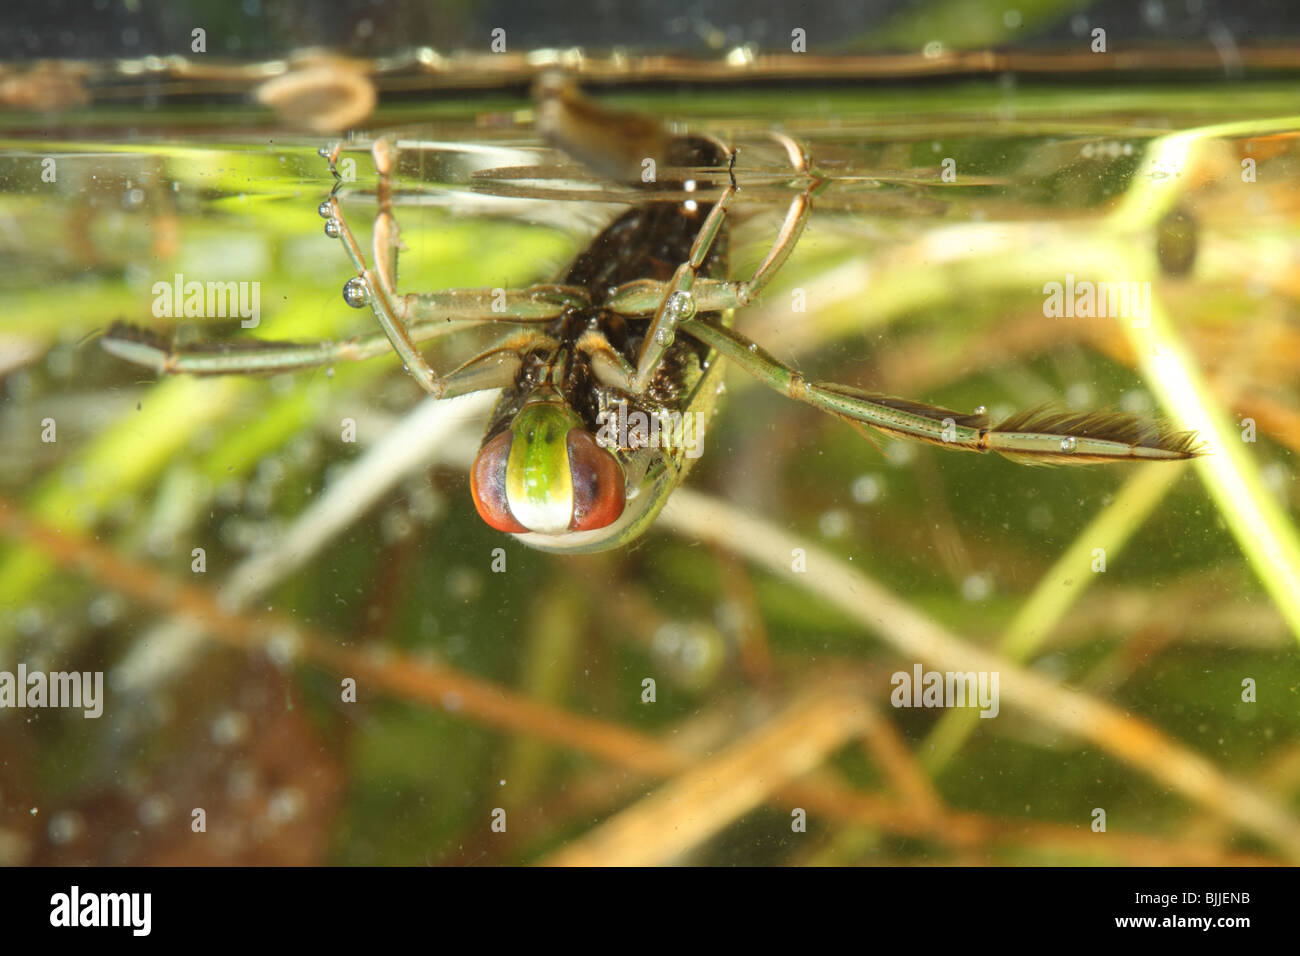 Backswimmer or water-boatman Notonecta viridis in pond at water surface Stock Photo